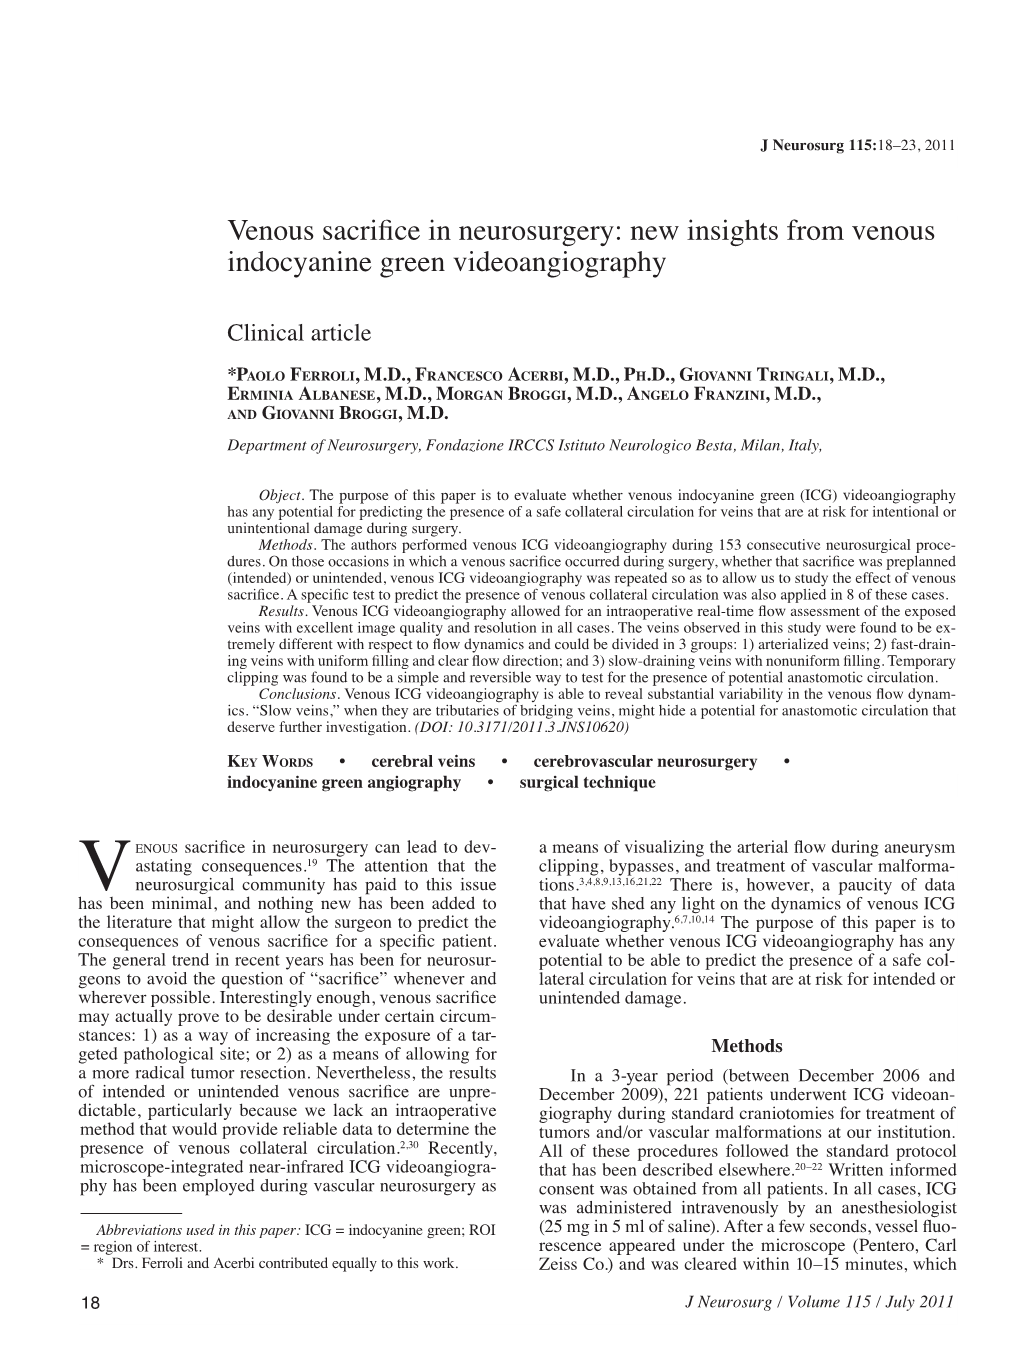 Venous Sacrifice in Neurosurgery: New Insights from Venous Indocyanine Green Videoangiography